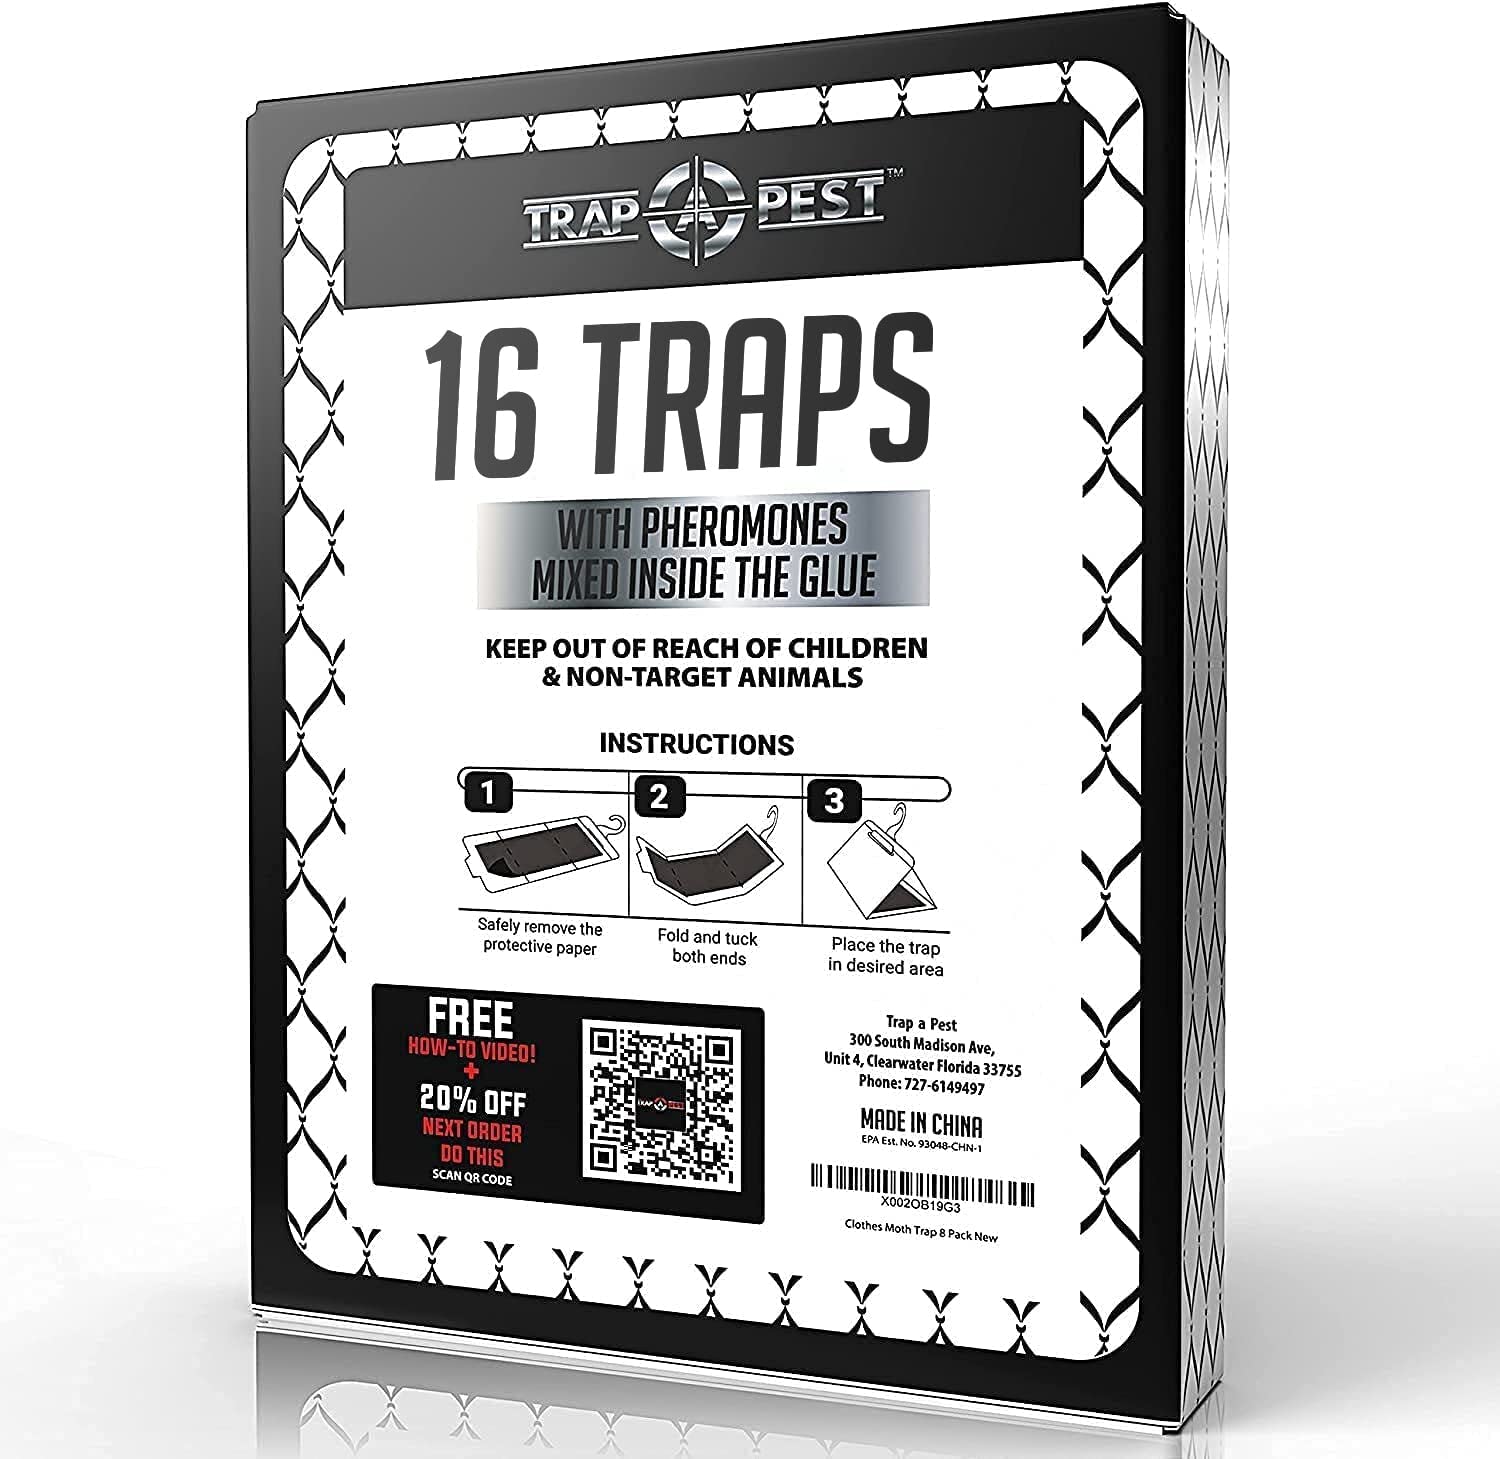 Terro Glue Clothes Moth Alert Trap (2-Pack) - Honor Building Supply